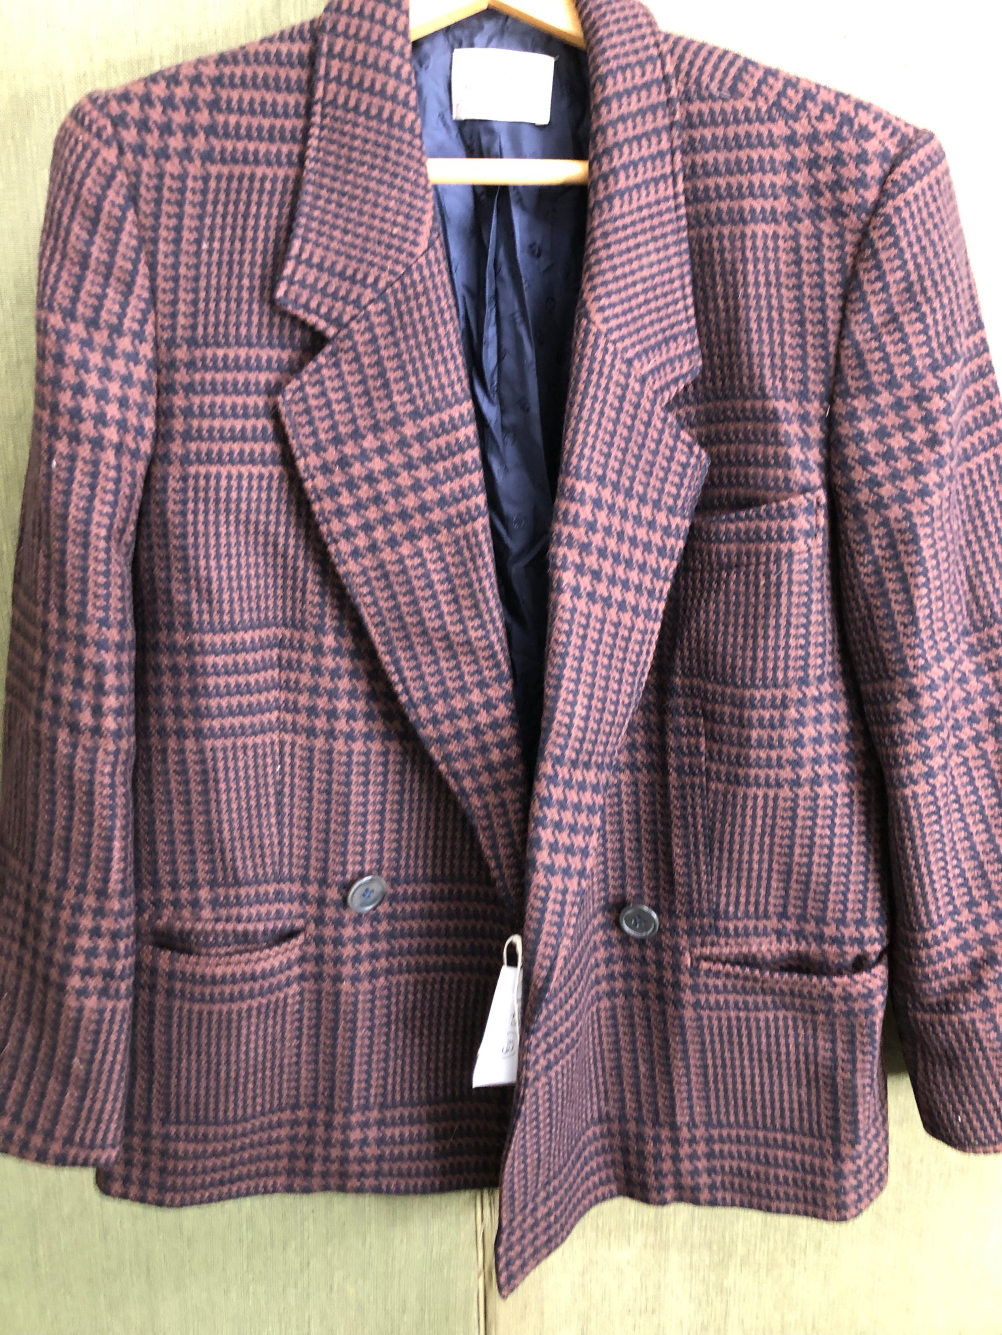 JACKET. HARRY HALL, MADE IN ENGLAND 100% WOOL AND LINED CHECK JACKET PIT TO PIT 43cms, SHOULDER TO - Image 9 of 11